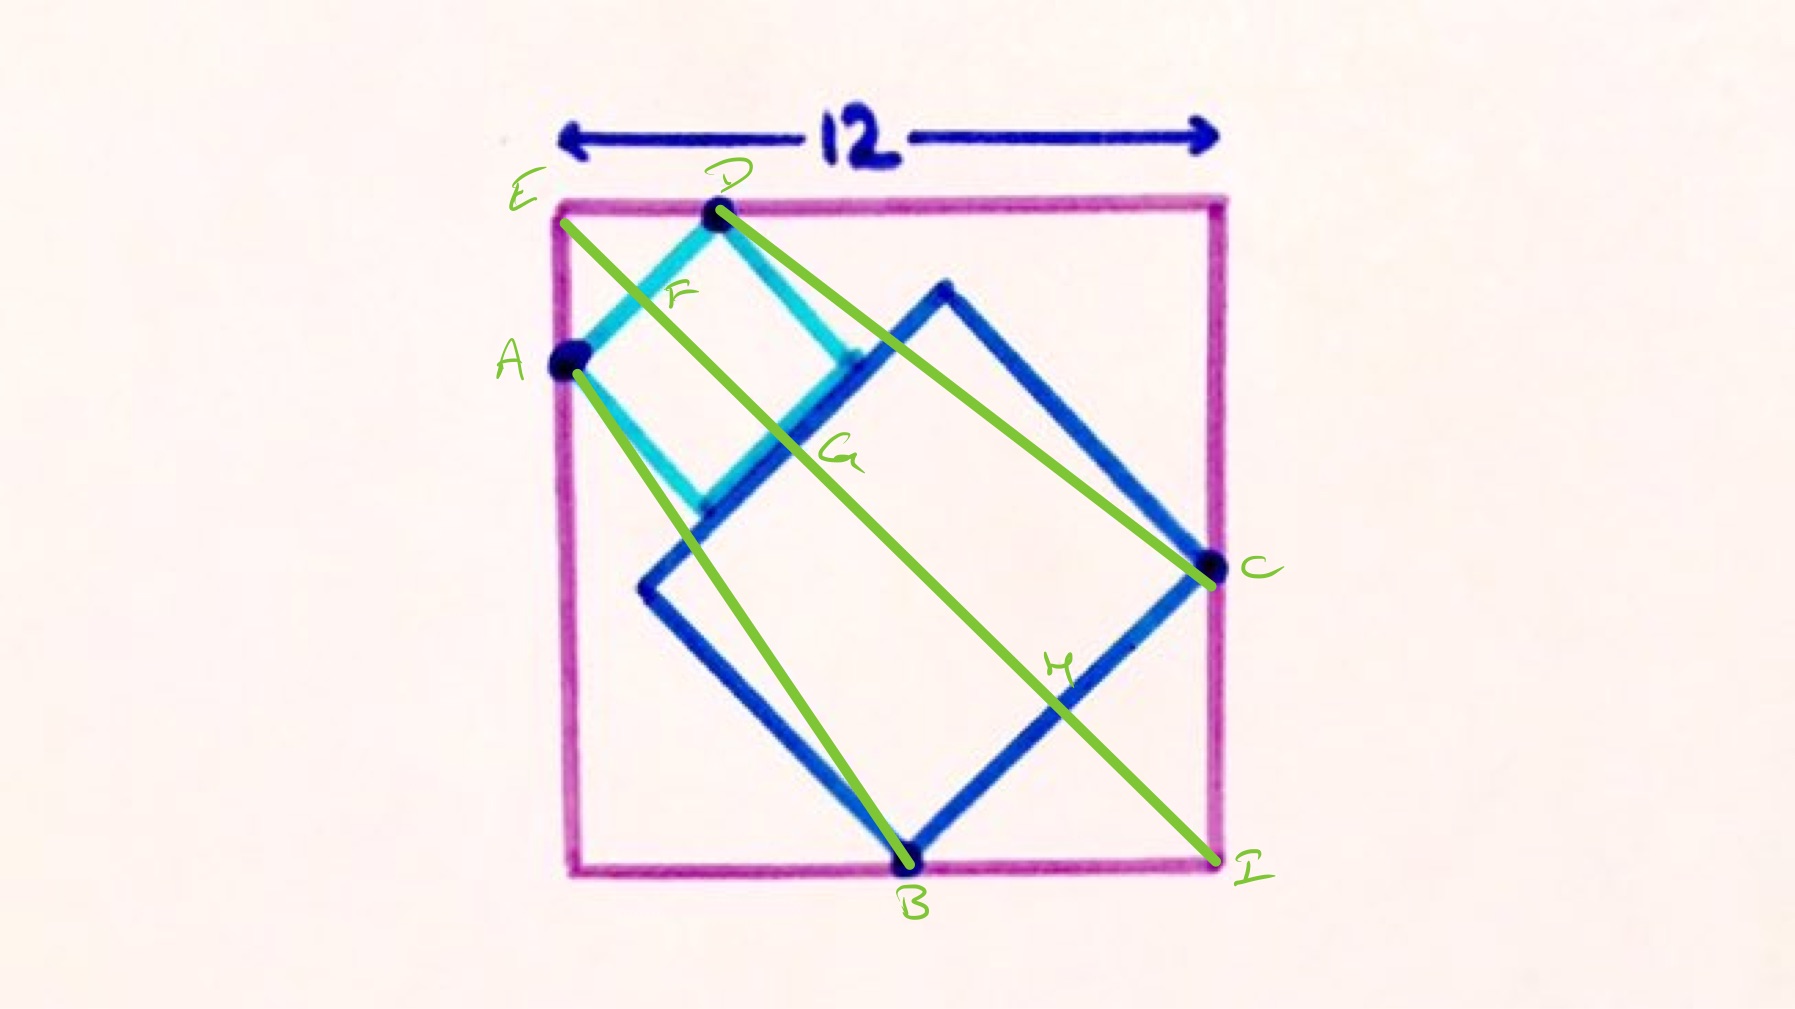 Quadrilateral from two squares in a square labelled